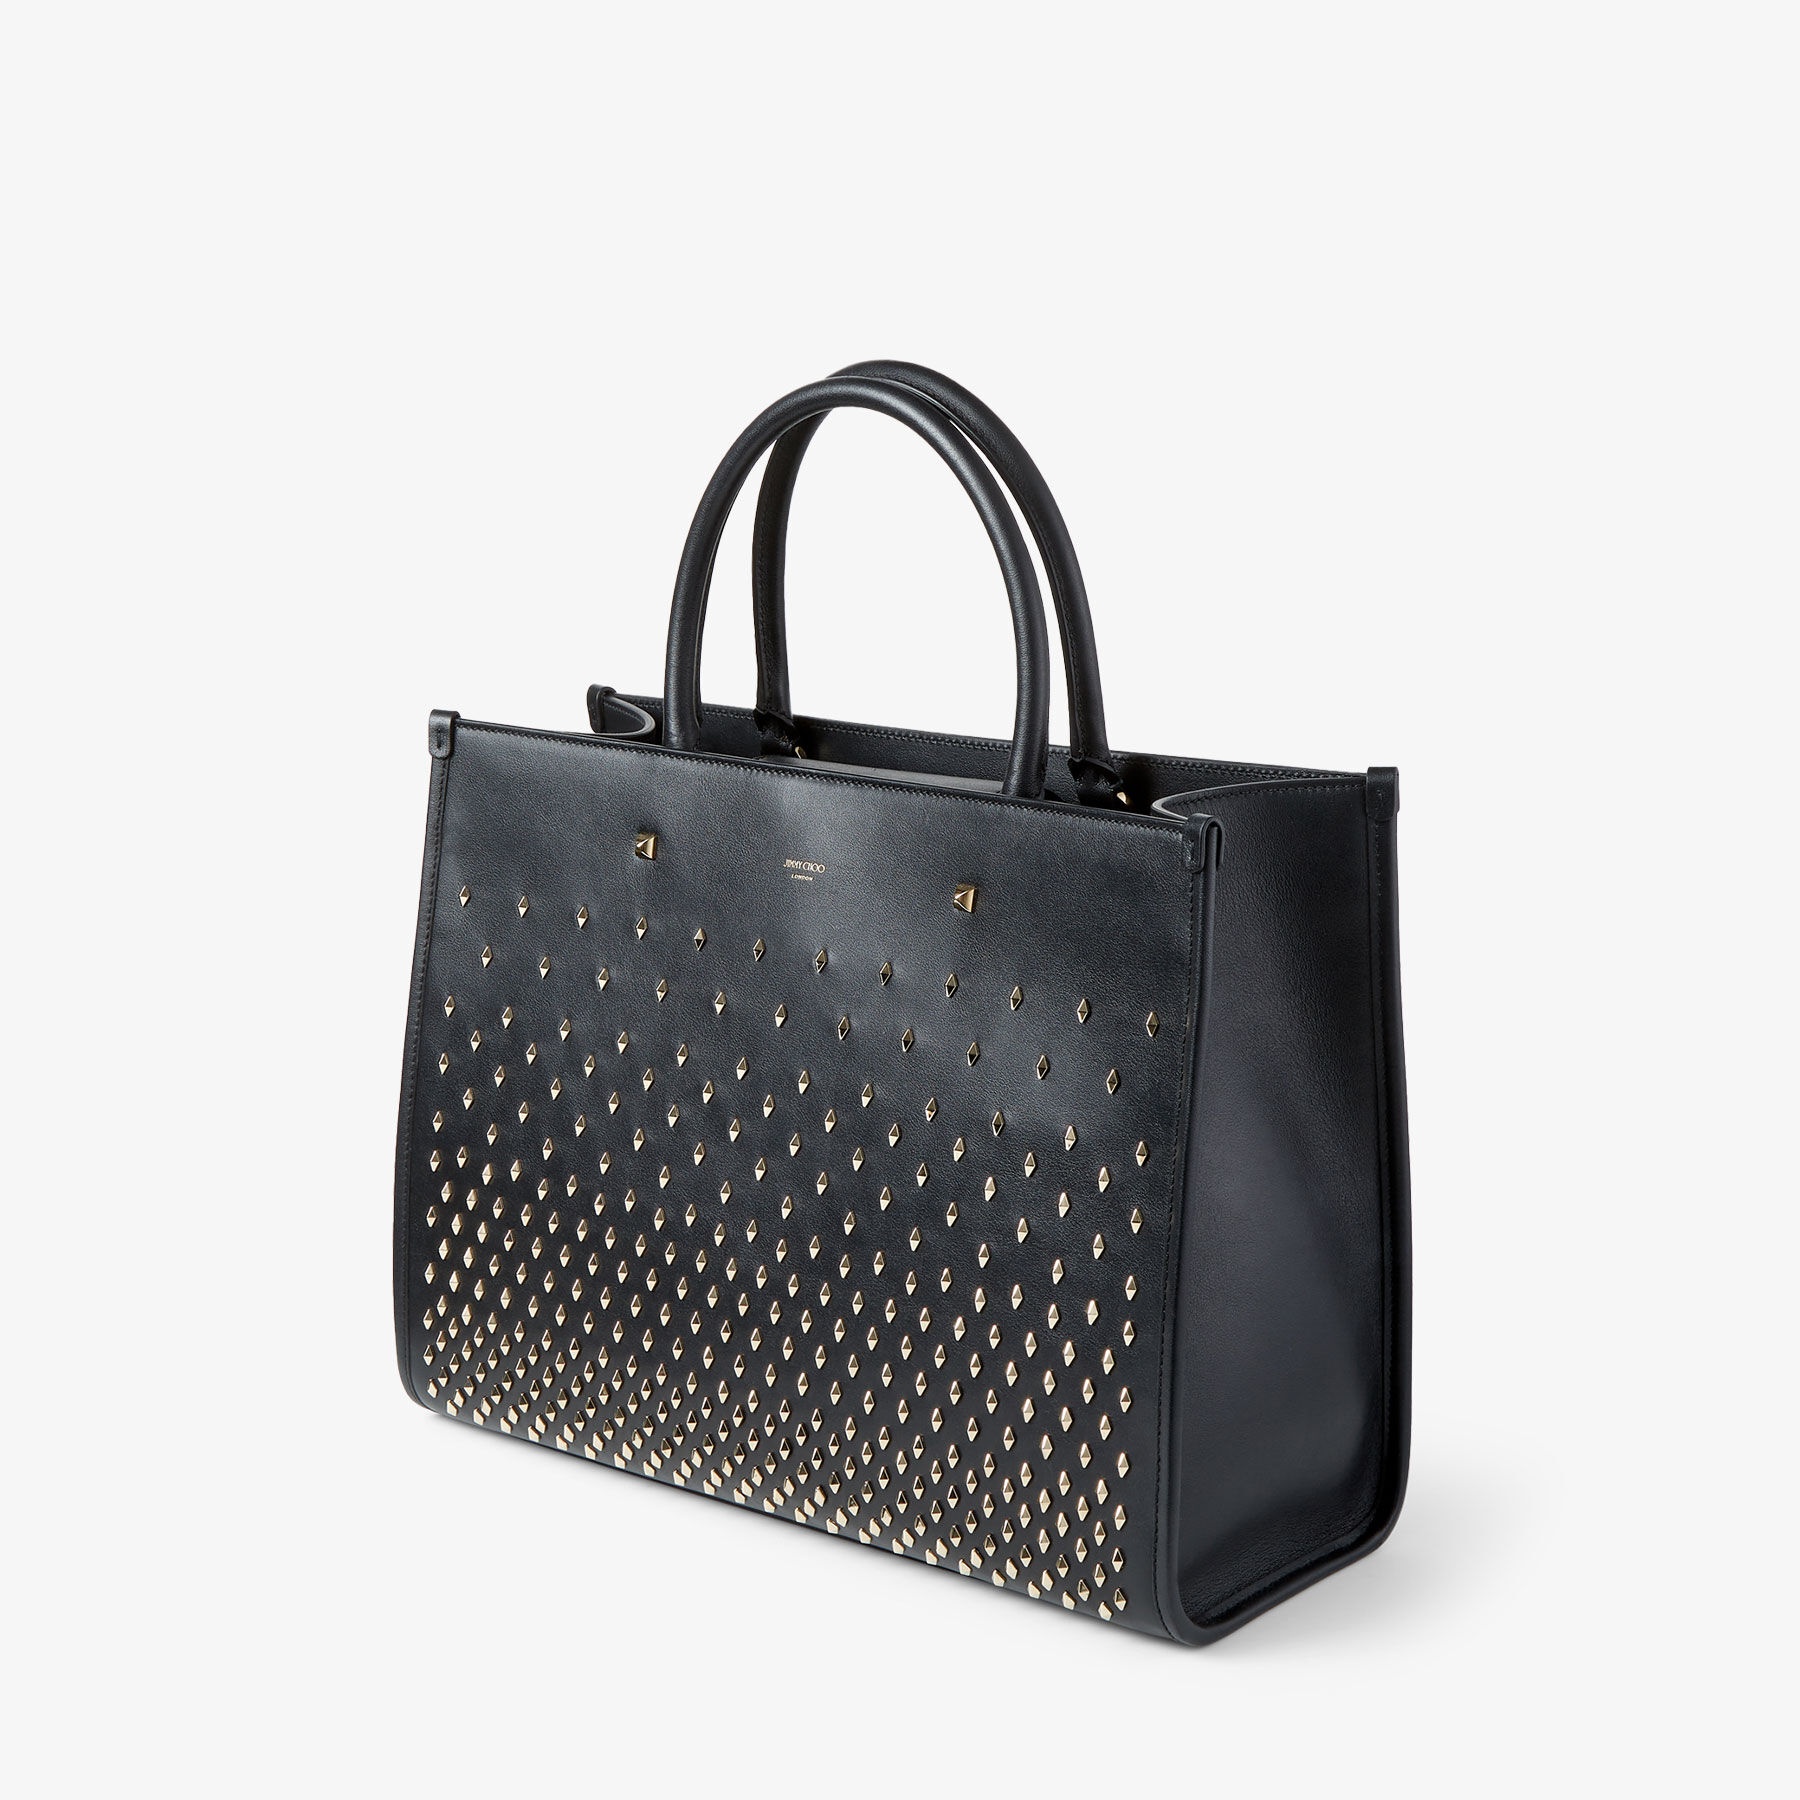 Varenne M Tote
Black Leather Tote Bag with Studs - 2